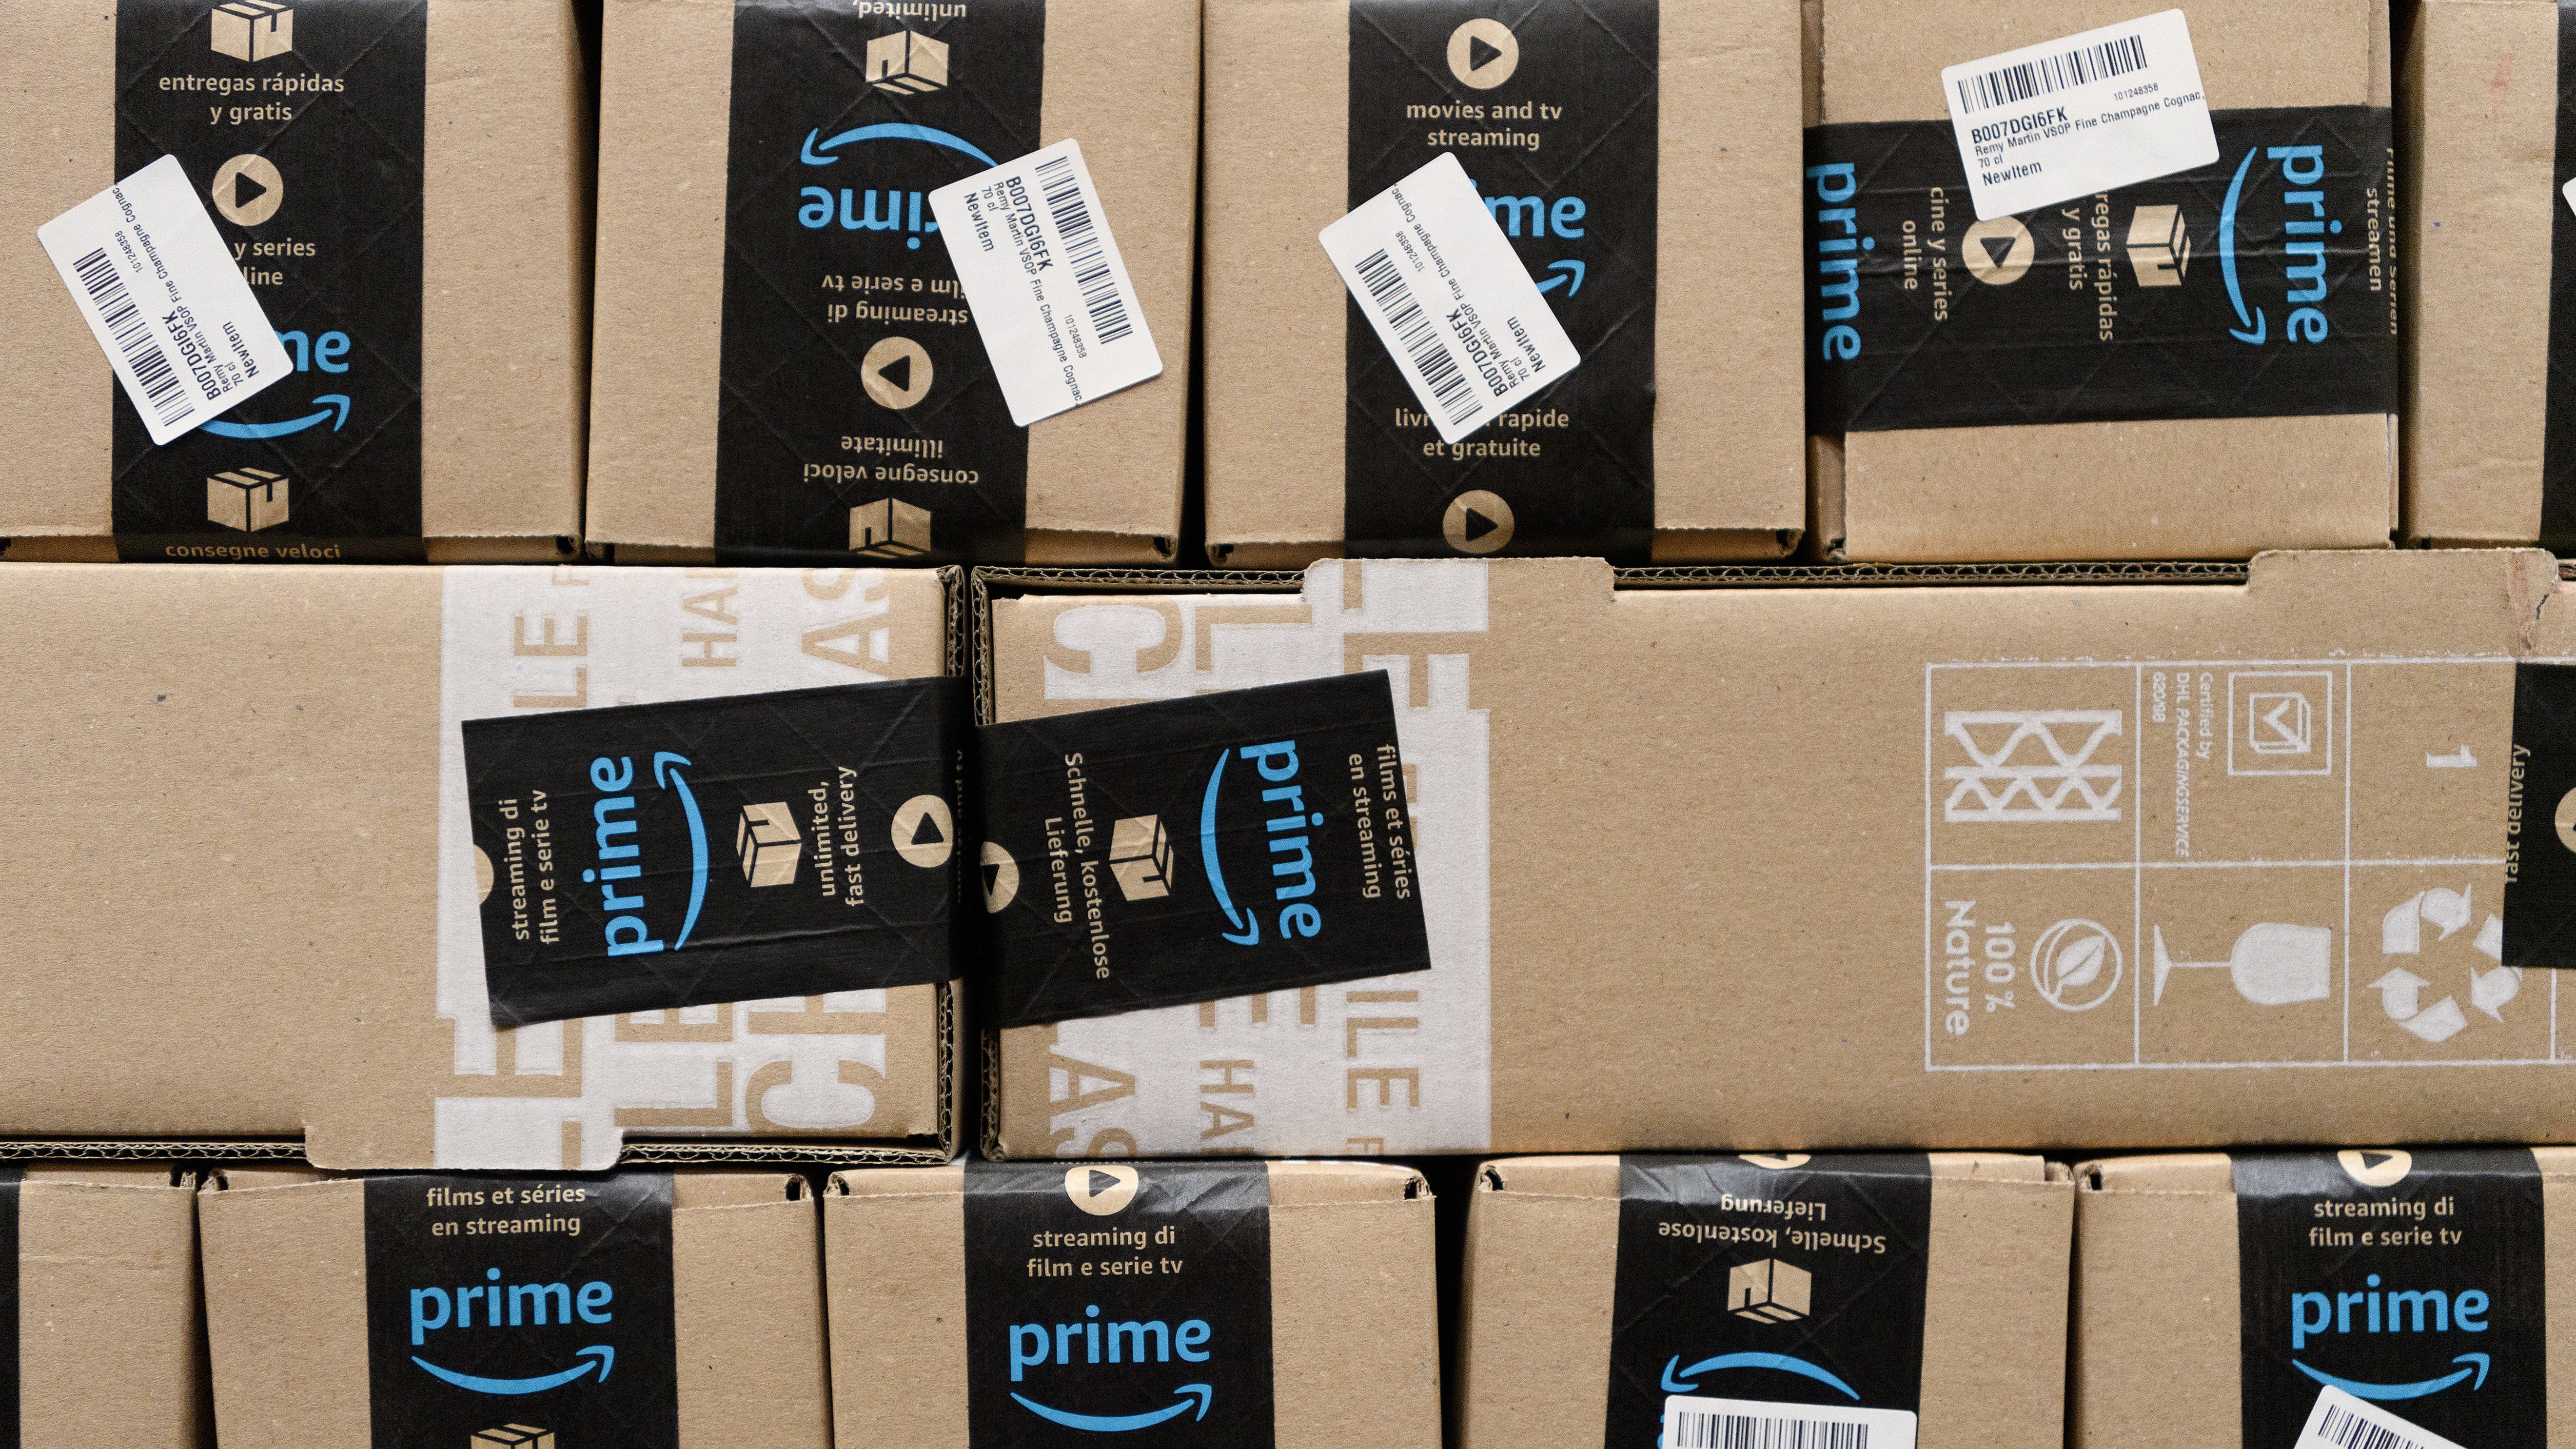 How To Ensure Your Amazon Purchase Isn't Dangerous